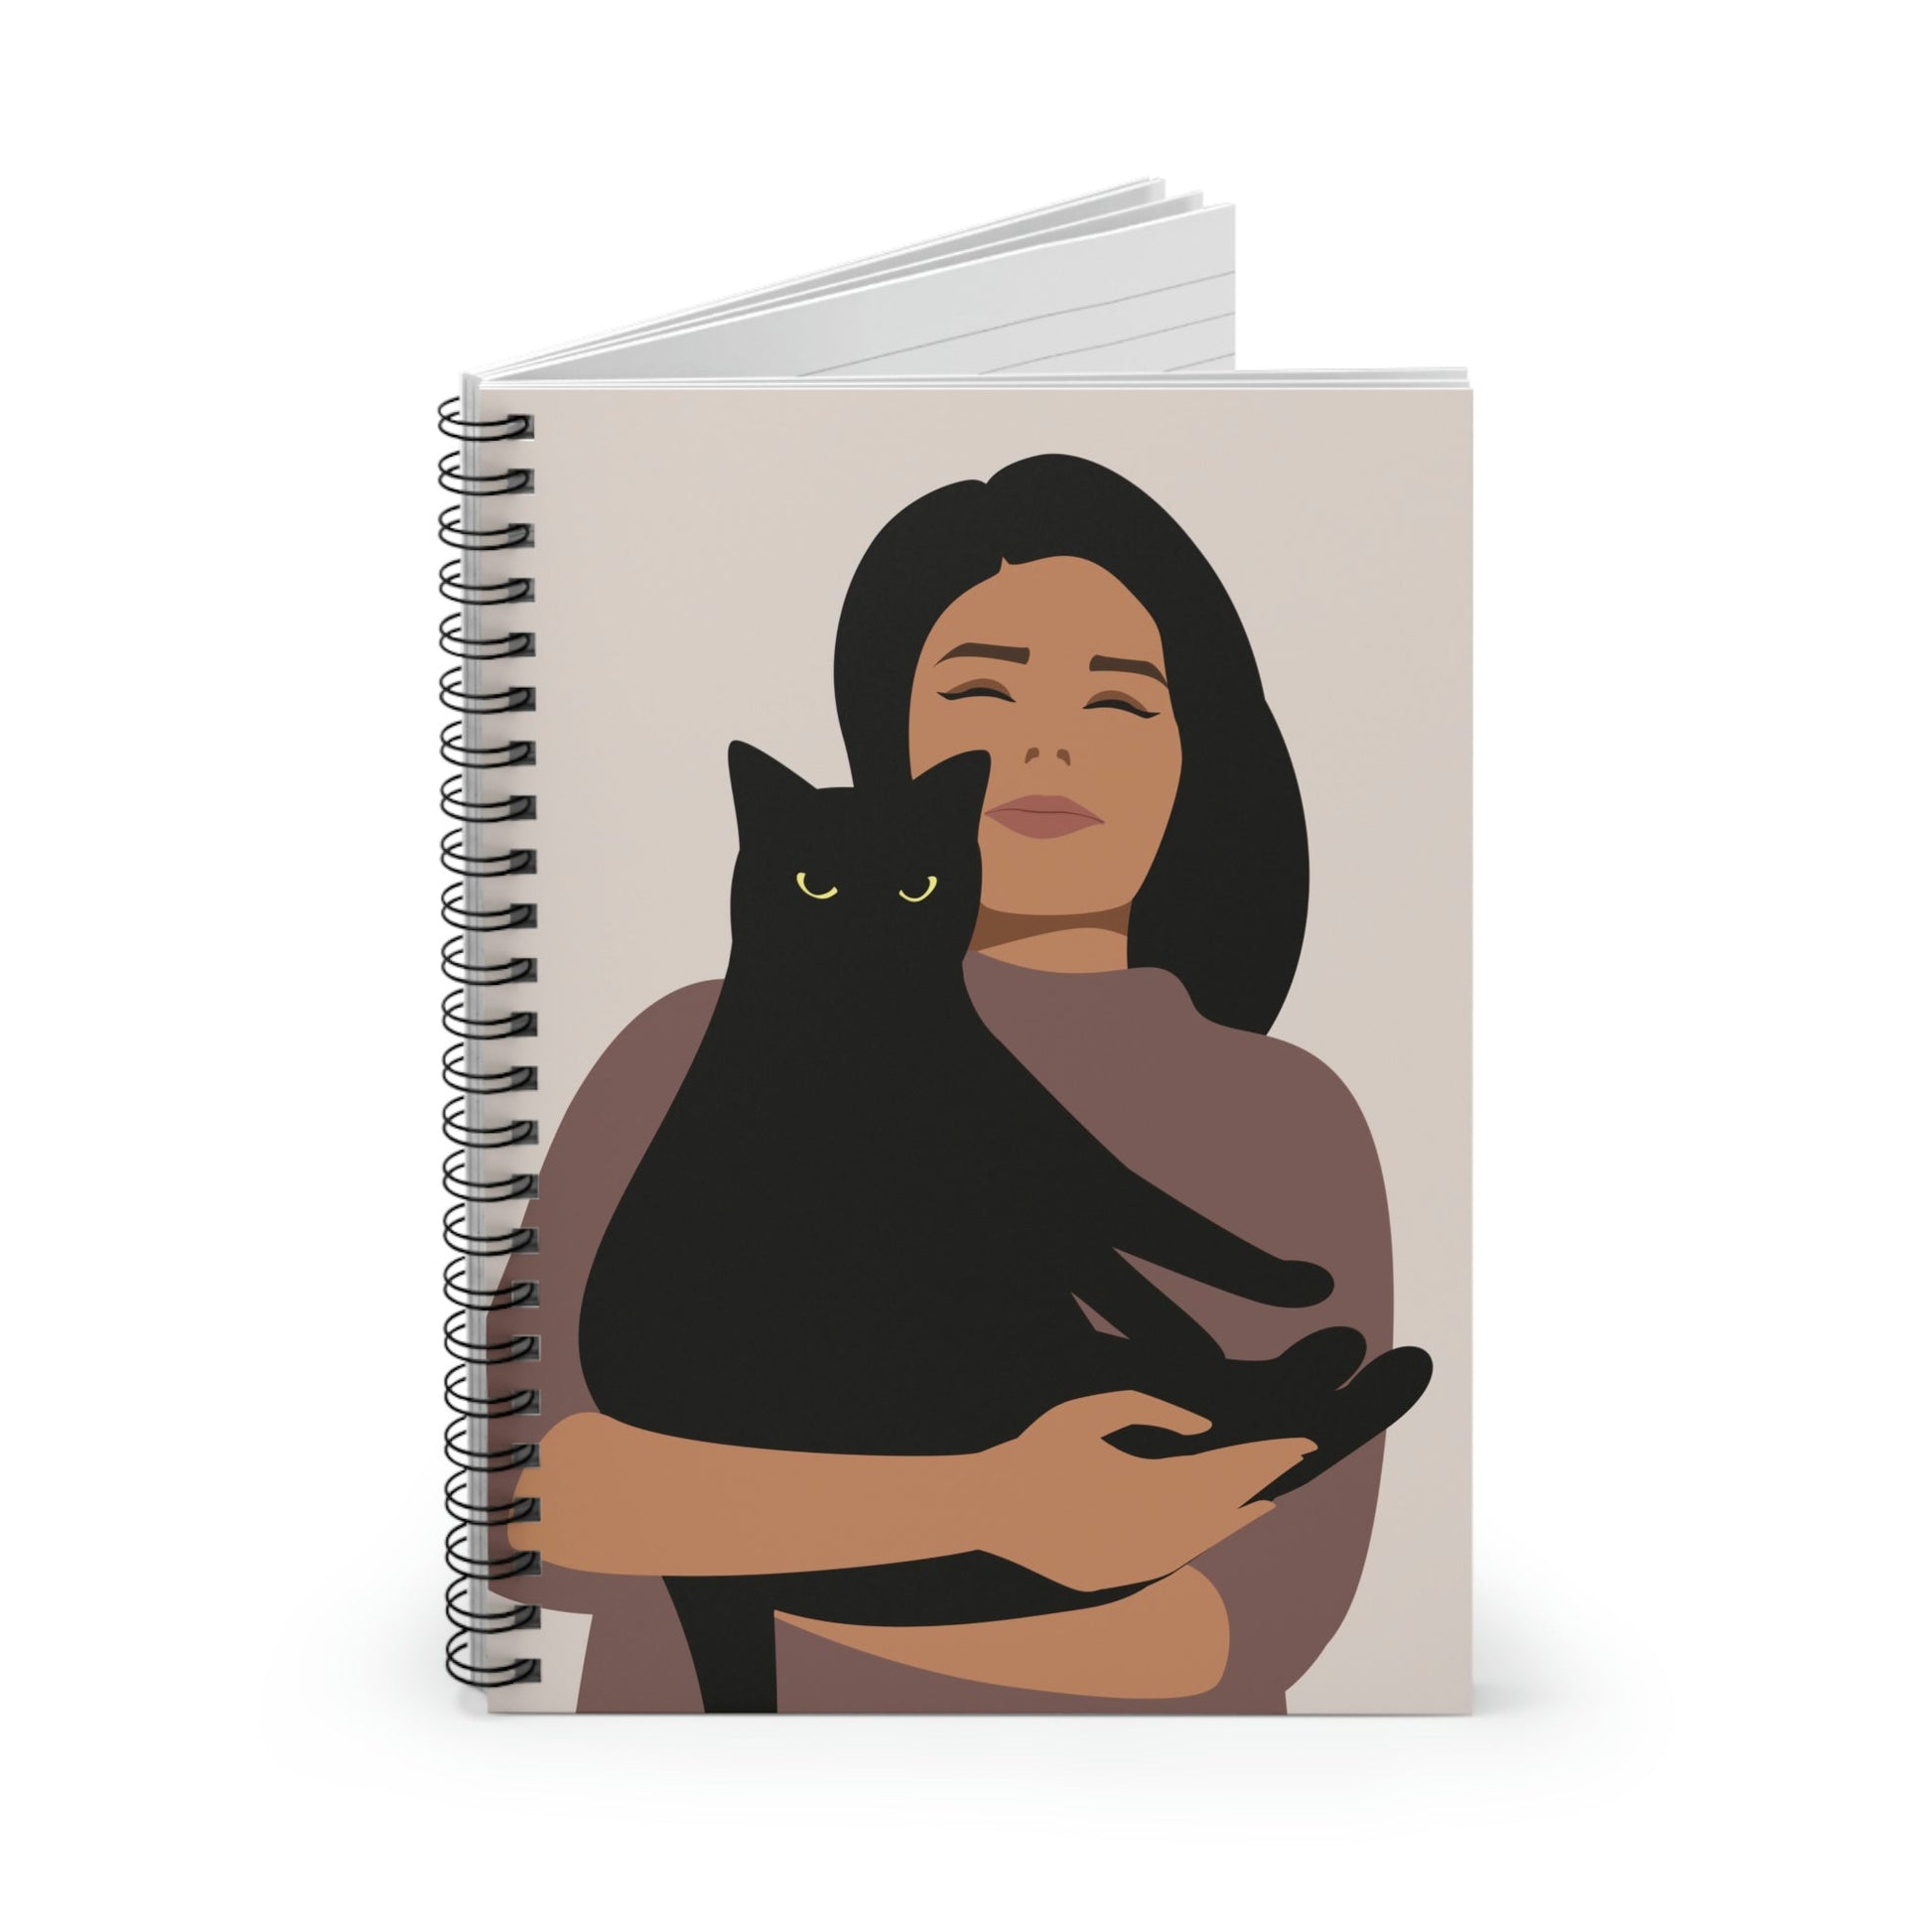 Woman with Black Cat Mininal Aesthetic Art Spiral Notebook Ruled Line Ichaku [Perfect Gifts Selection]